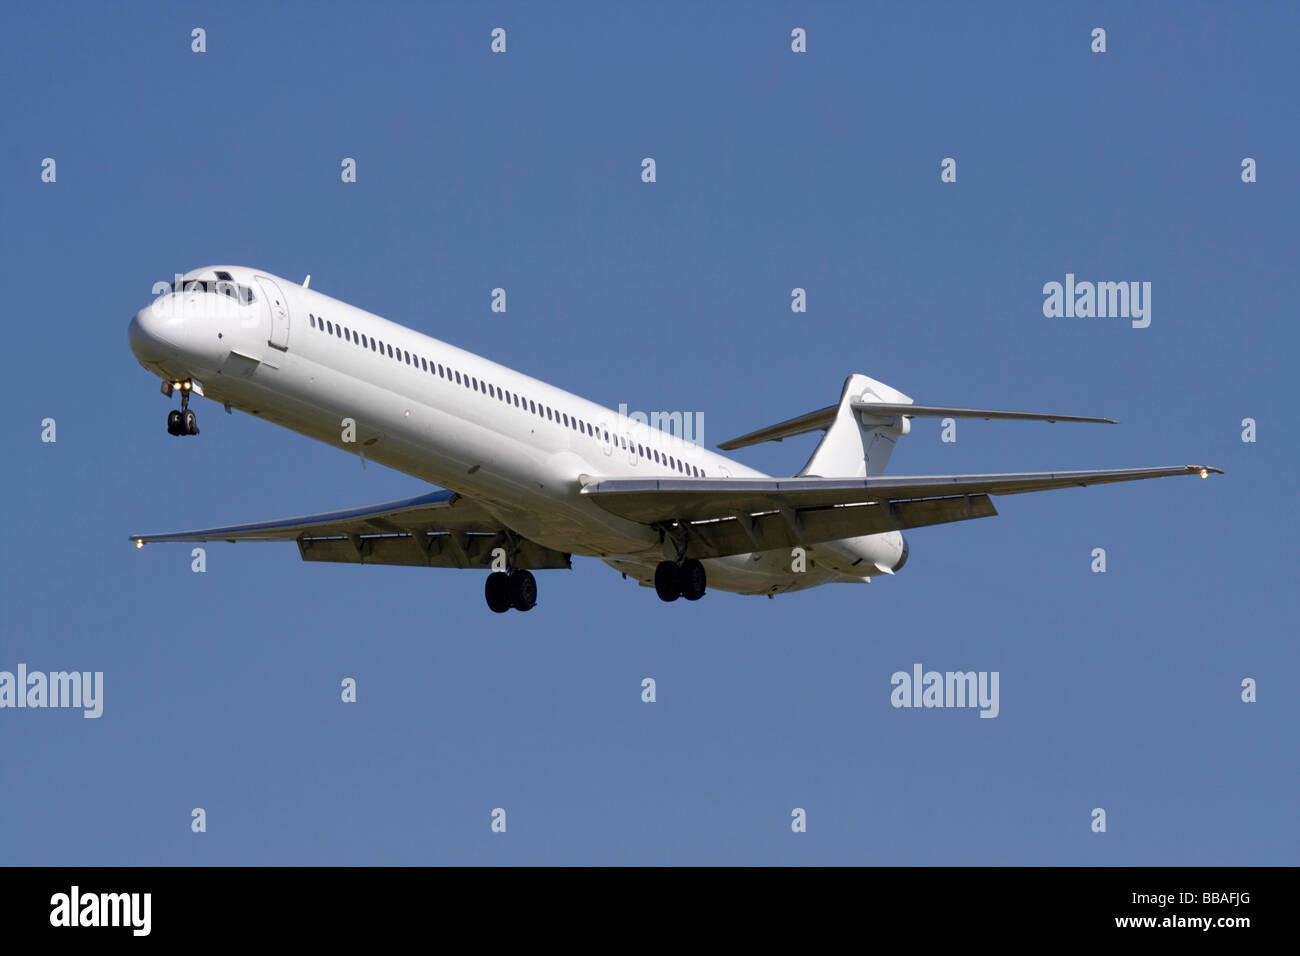 Commercial air travel. Airliner on final approach with no livery and proprietary details deleted Stock Photo